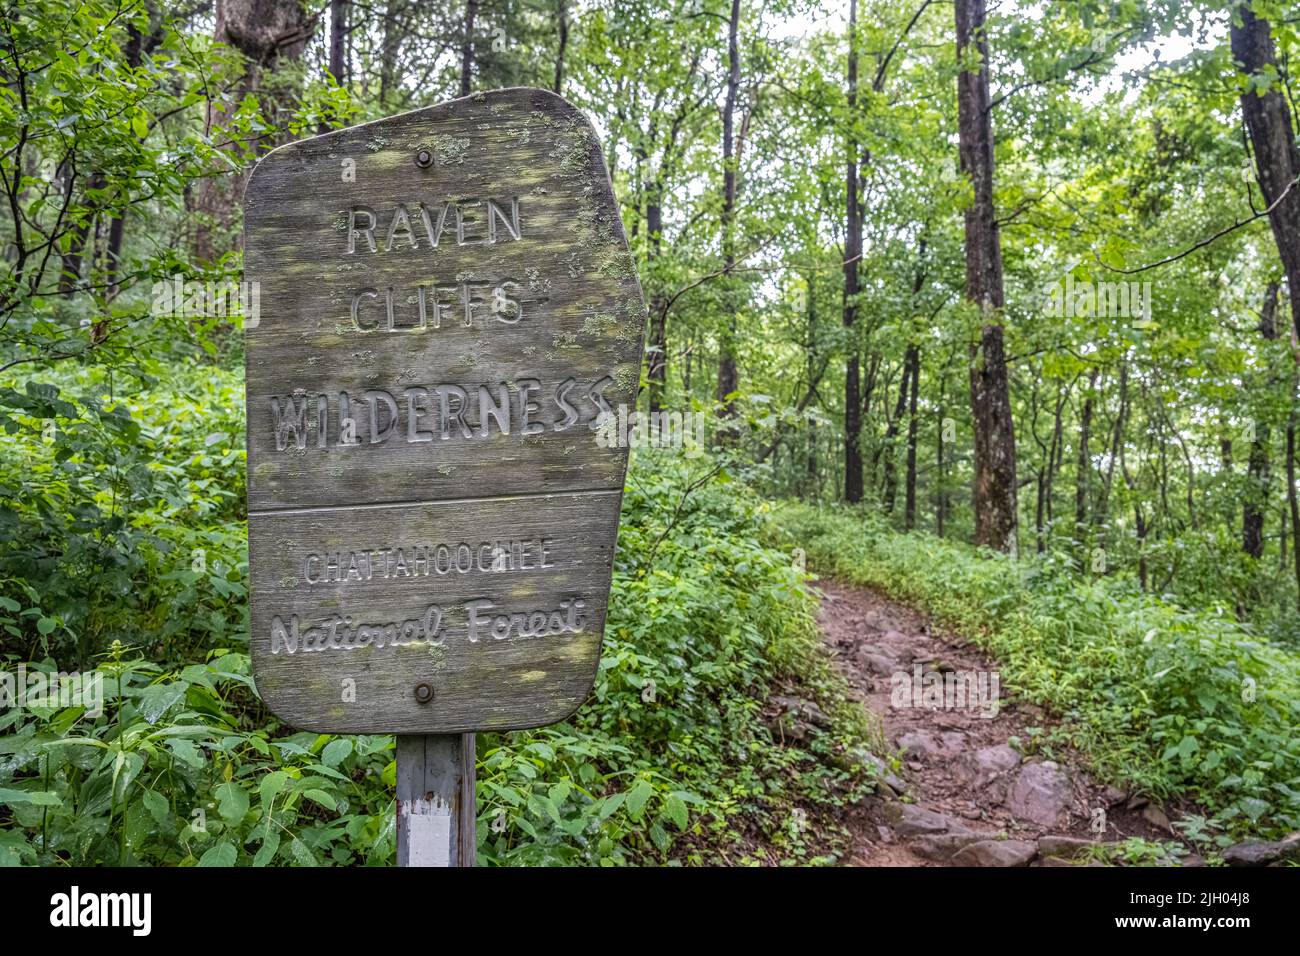 Trail marker for Raven Cliffs Wilderness in the Chattahoochee National Forest along the Appalachian Trail near Walasi-Yi in Northeast Georgia. (USA) Stock Photo